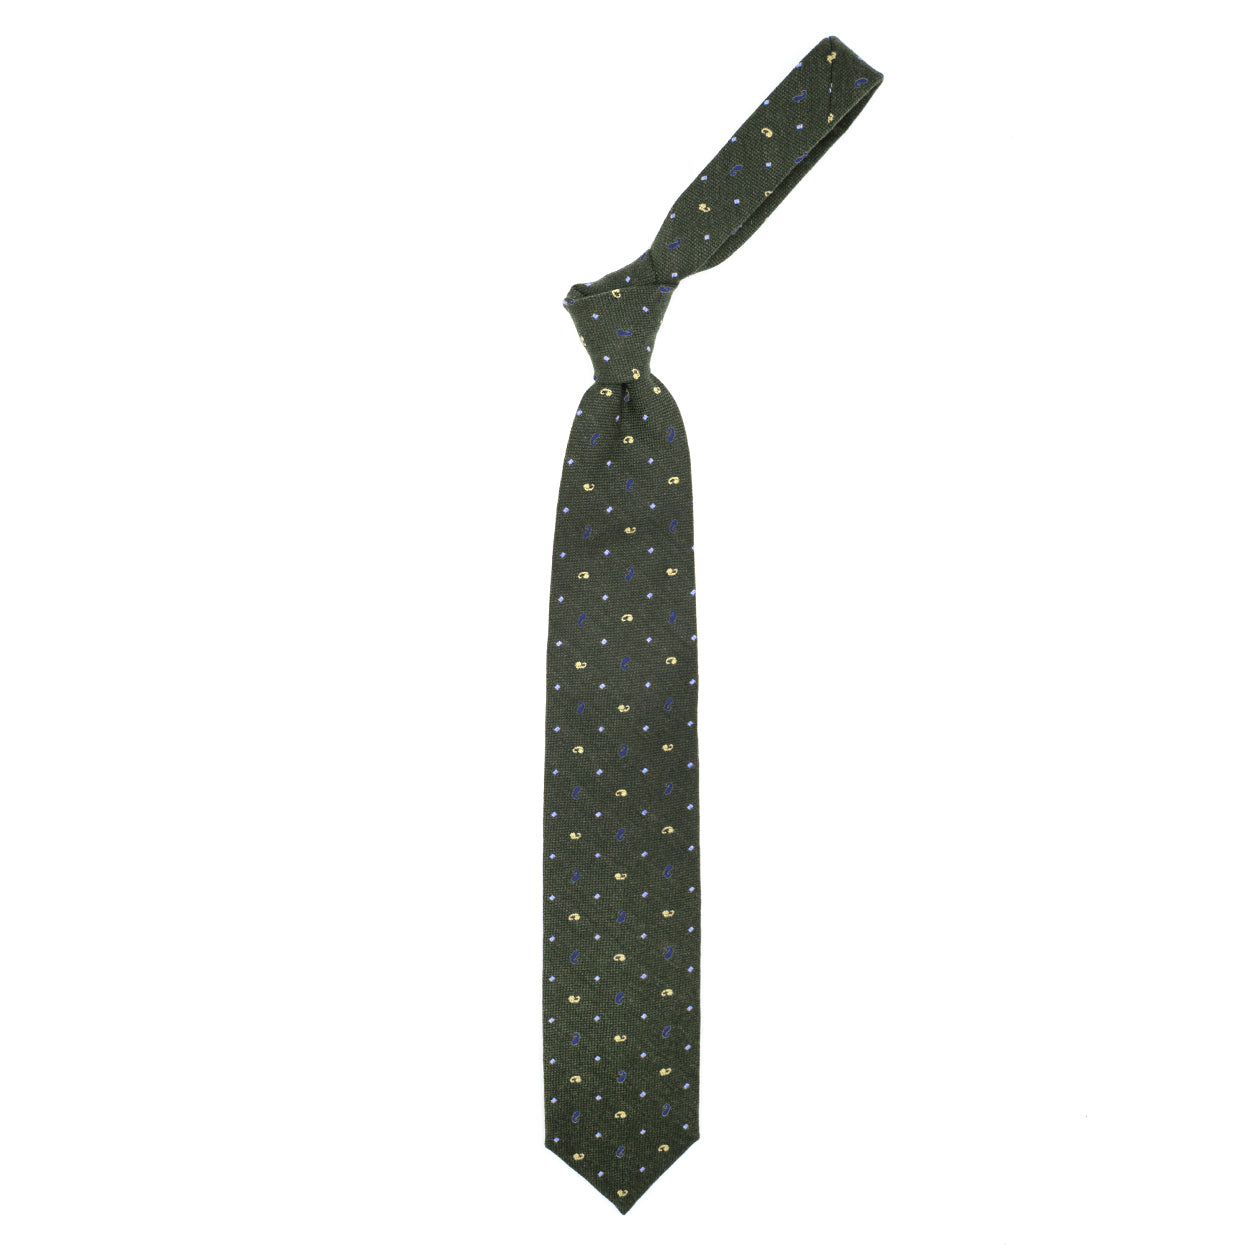 Moss green tie with yellow and purple paisleys and blue squares